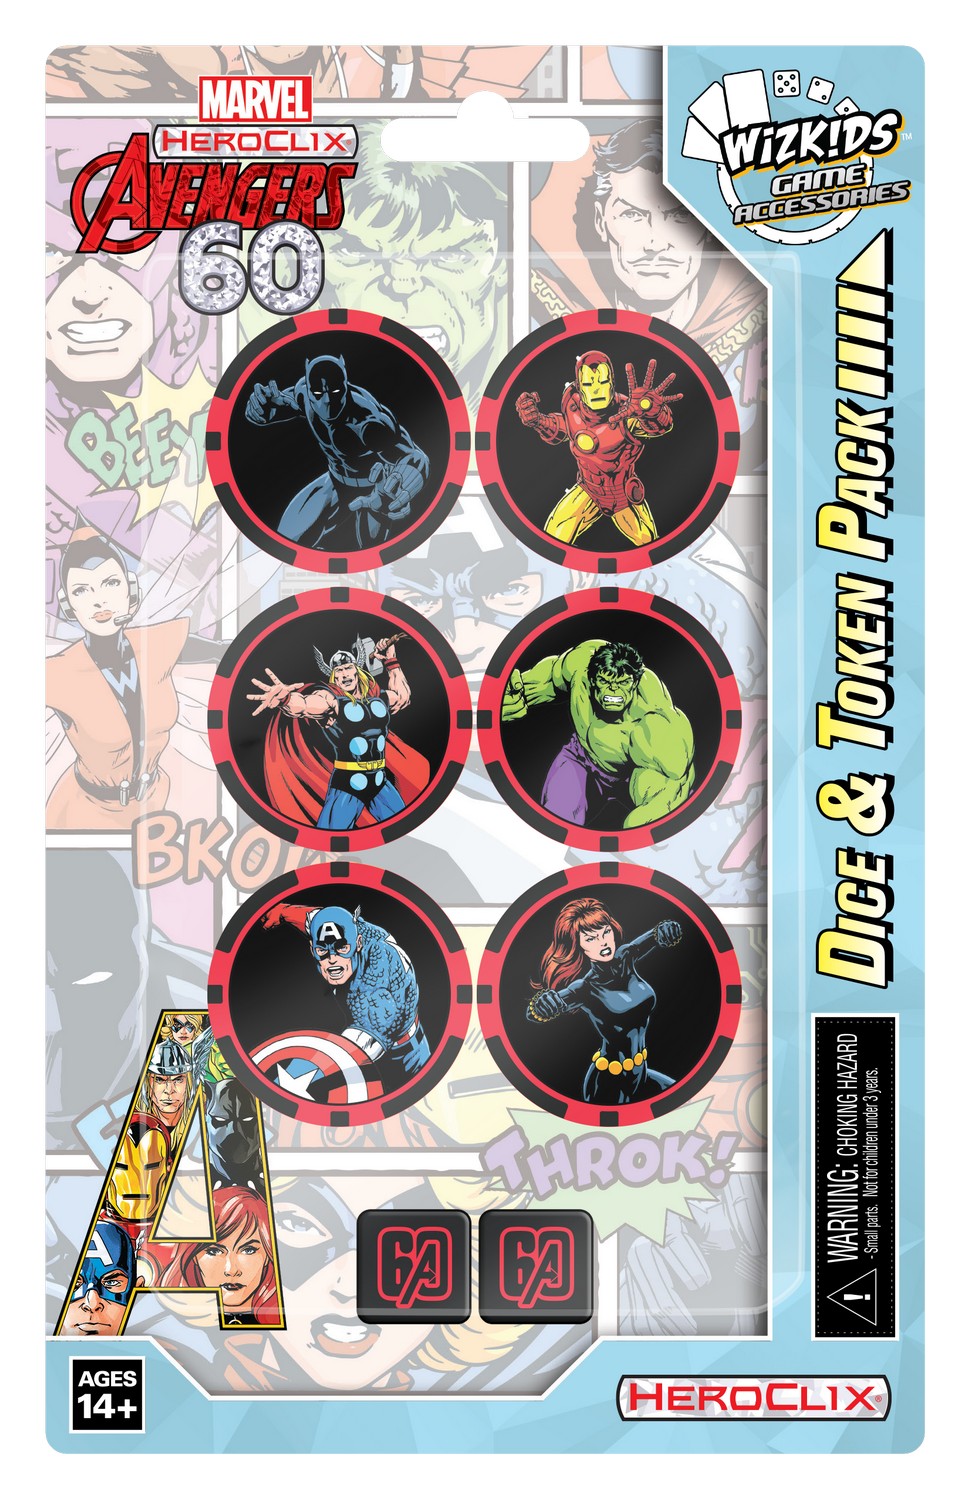  Marvel HeroClix: Avengers 60th Anniversary - Dice and Token Pack  0634482849088